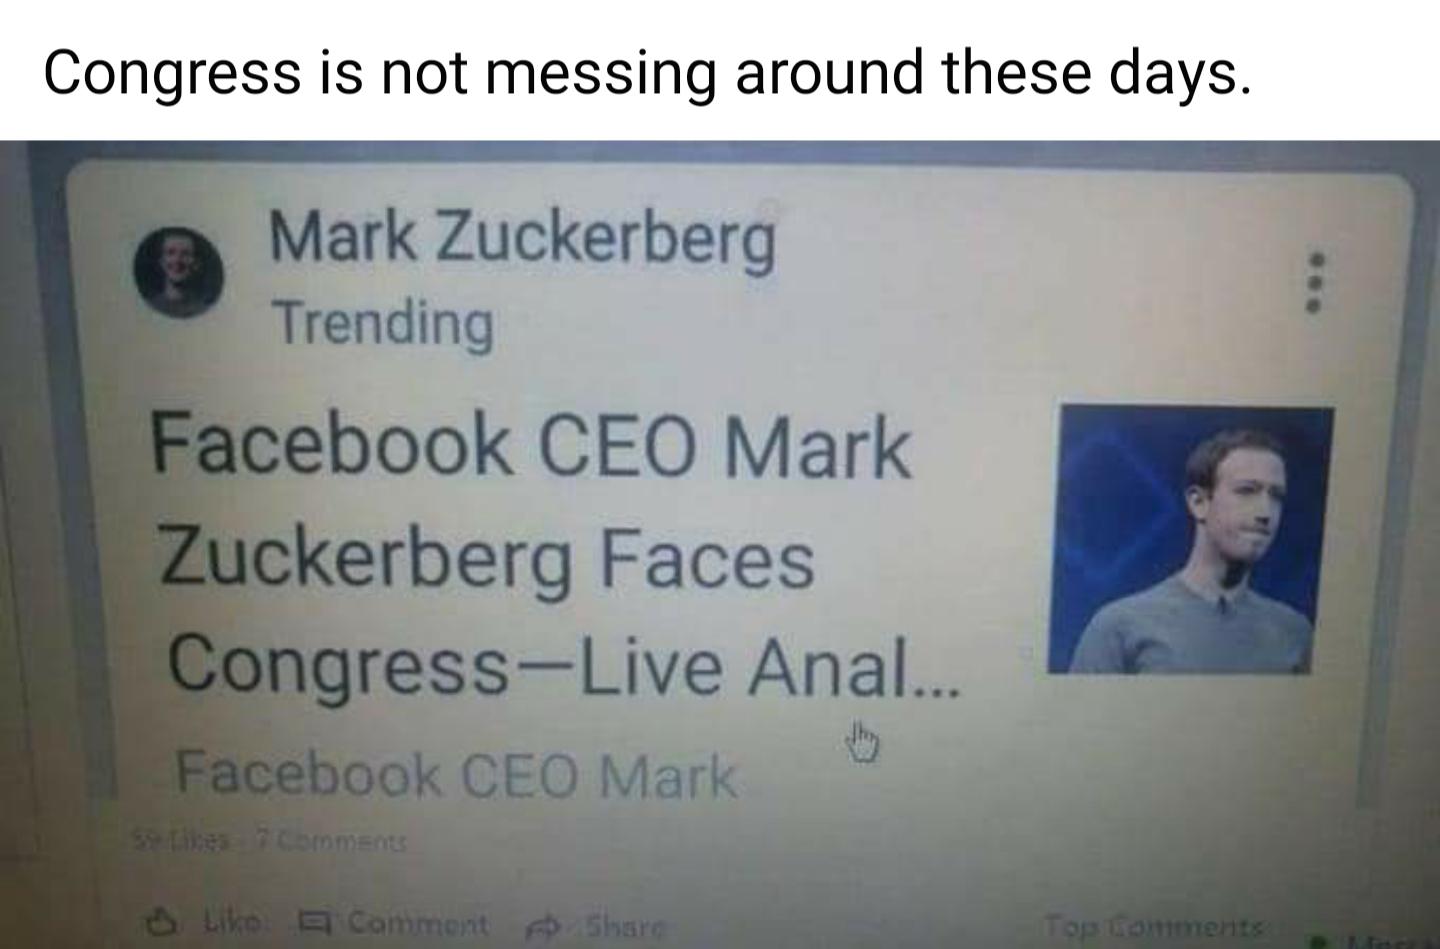 Funny, Congress, Anal, Zuckerberg, Mark, Zucc other memes Funny, Congress, Anal, Zuckerberg, Mark, Zucc text: Congress is not messing around these days. Mark Zuckerberg O Trending Facebook CEO Mark Zuckerberg Faces Congress—Live Anal... Facebook CEO Mark 